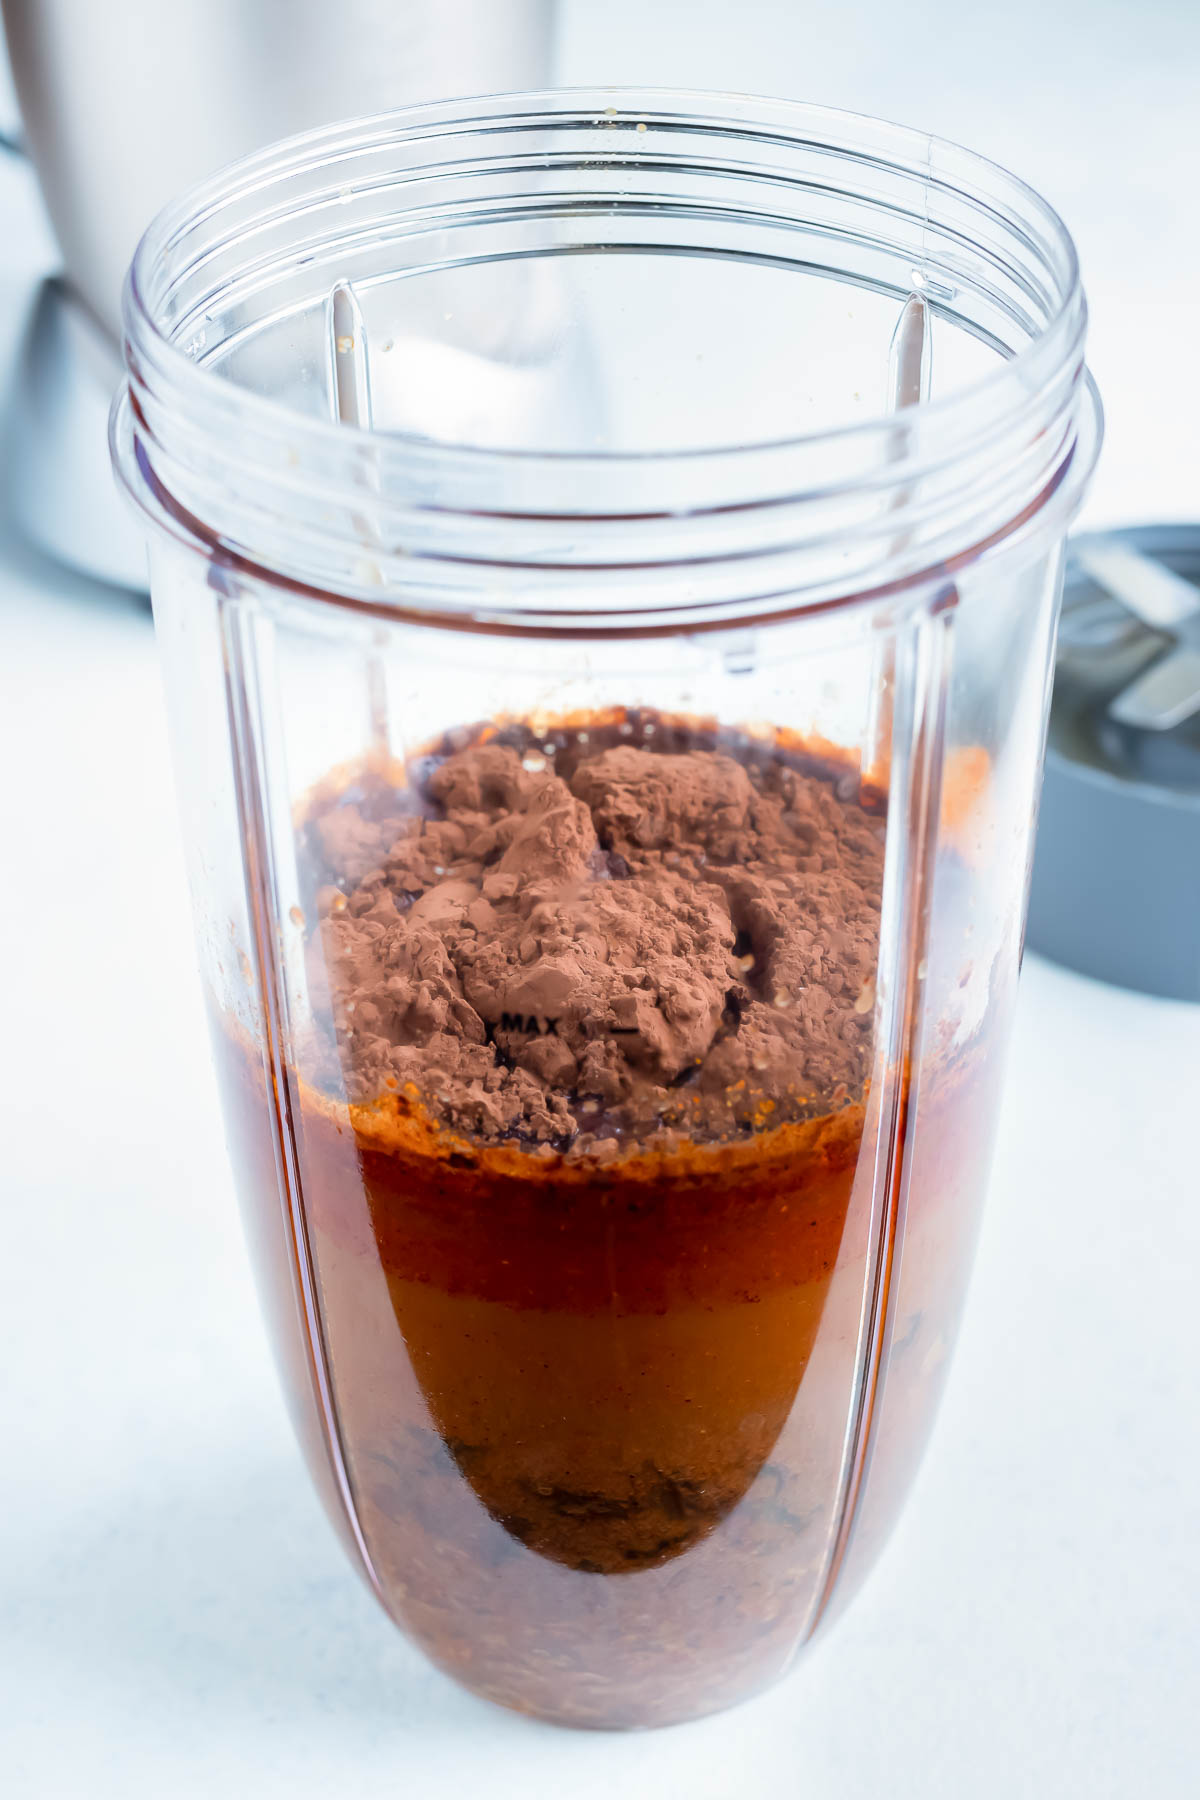 The onions, chipotle peppers, almond butter, raisins, cocoa powder, and remaining broth are added to a high speed blender.